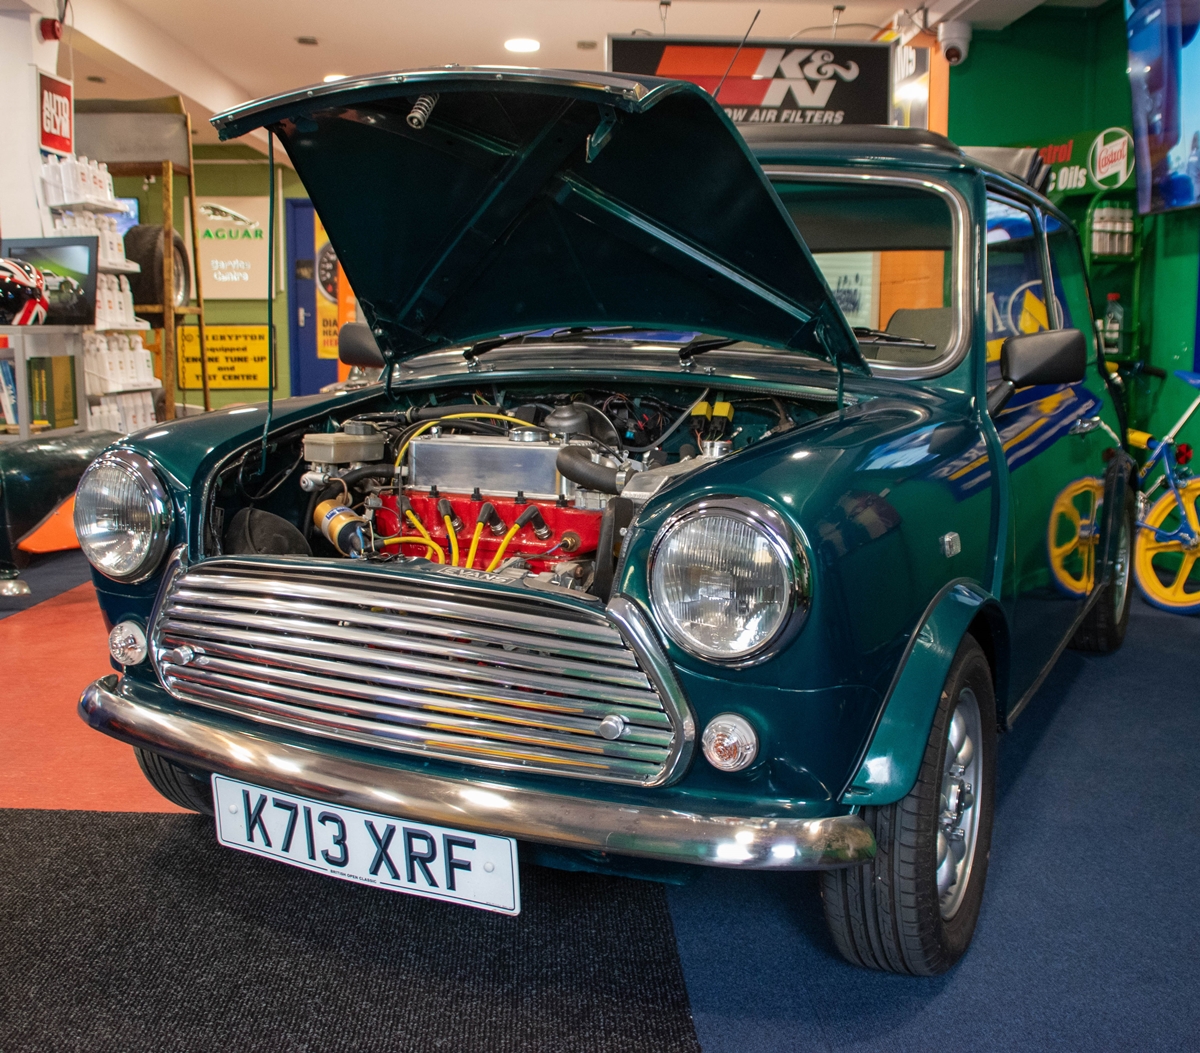 1992 K reg Limited Edition British Open Classic Mini 1 of only 900 made - 14k miles on the clock... - Image 6 of 8